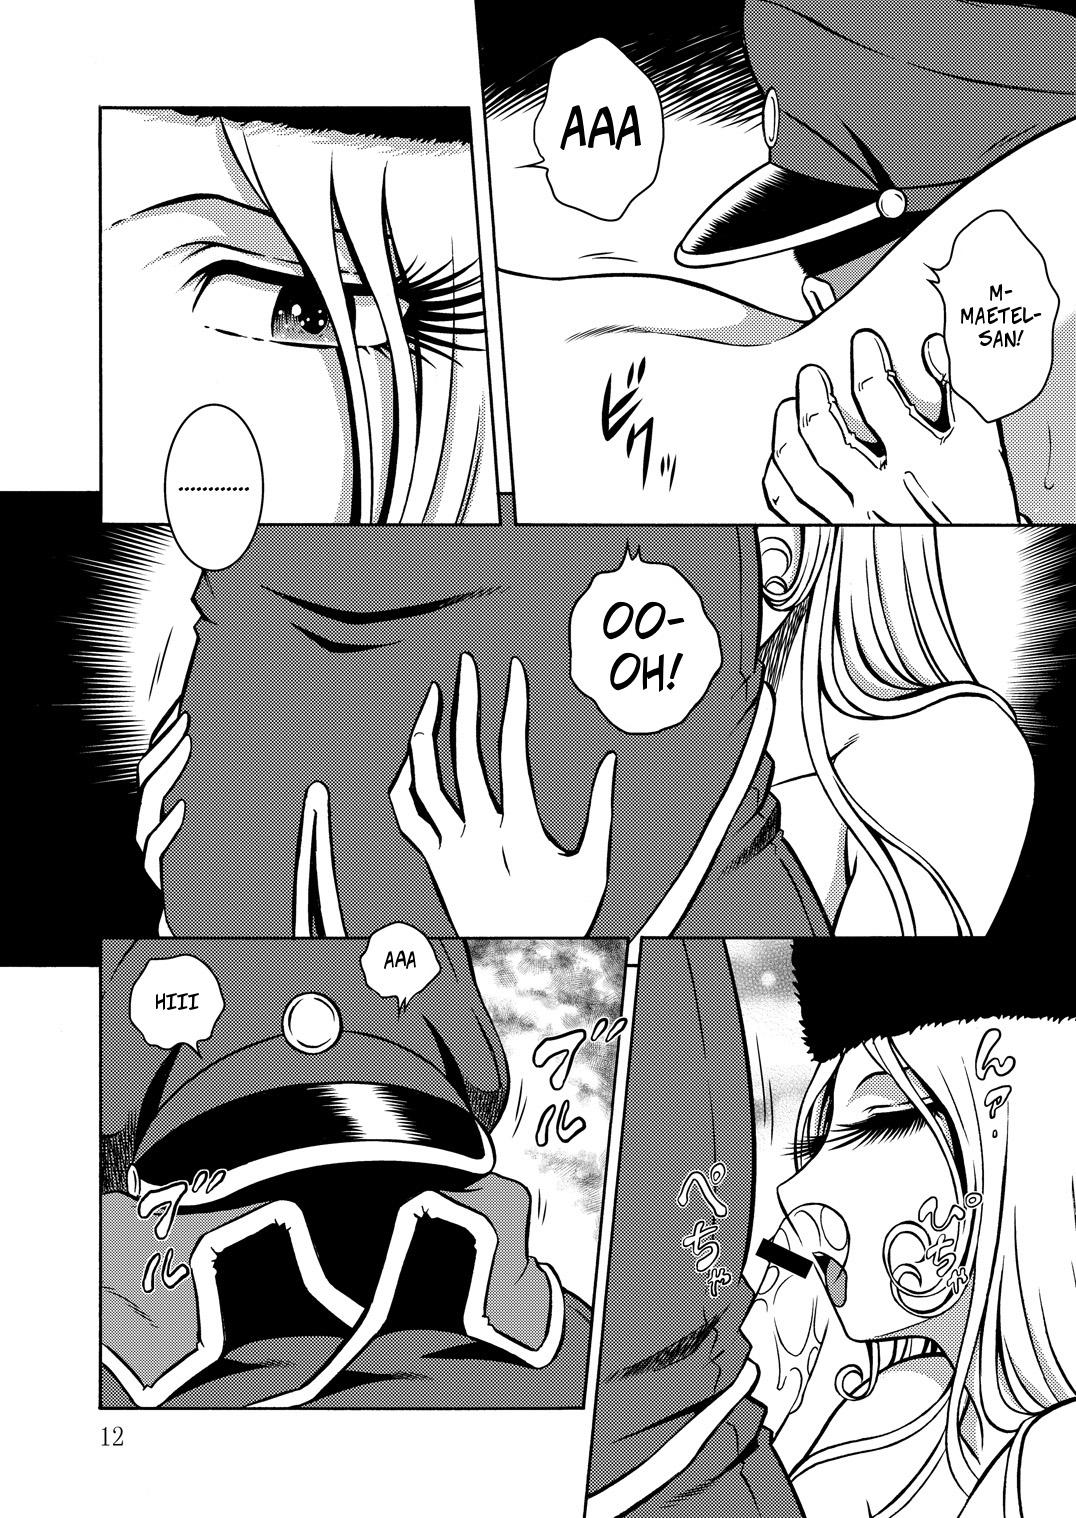 Stepfamily NIGHTHEAD GALAXY EXPRESS 999 2 - Galaxy express 999 Doublepenetration - Page 11